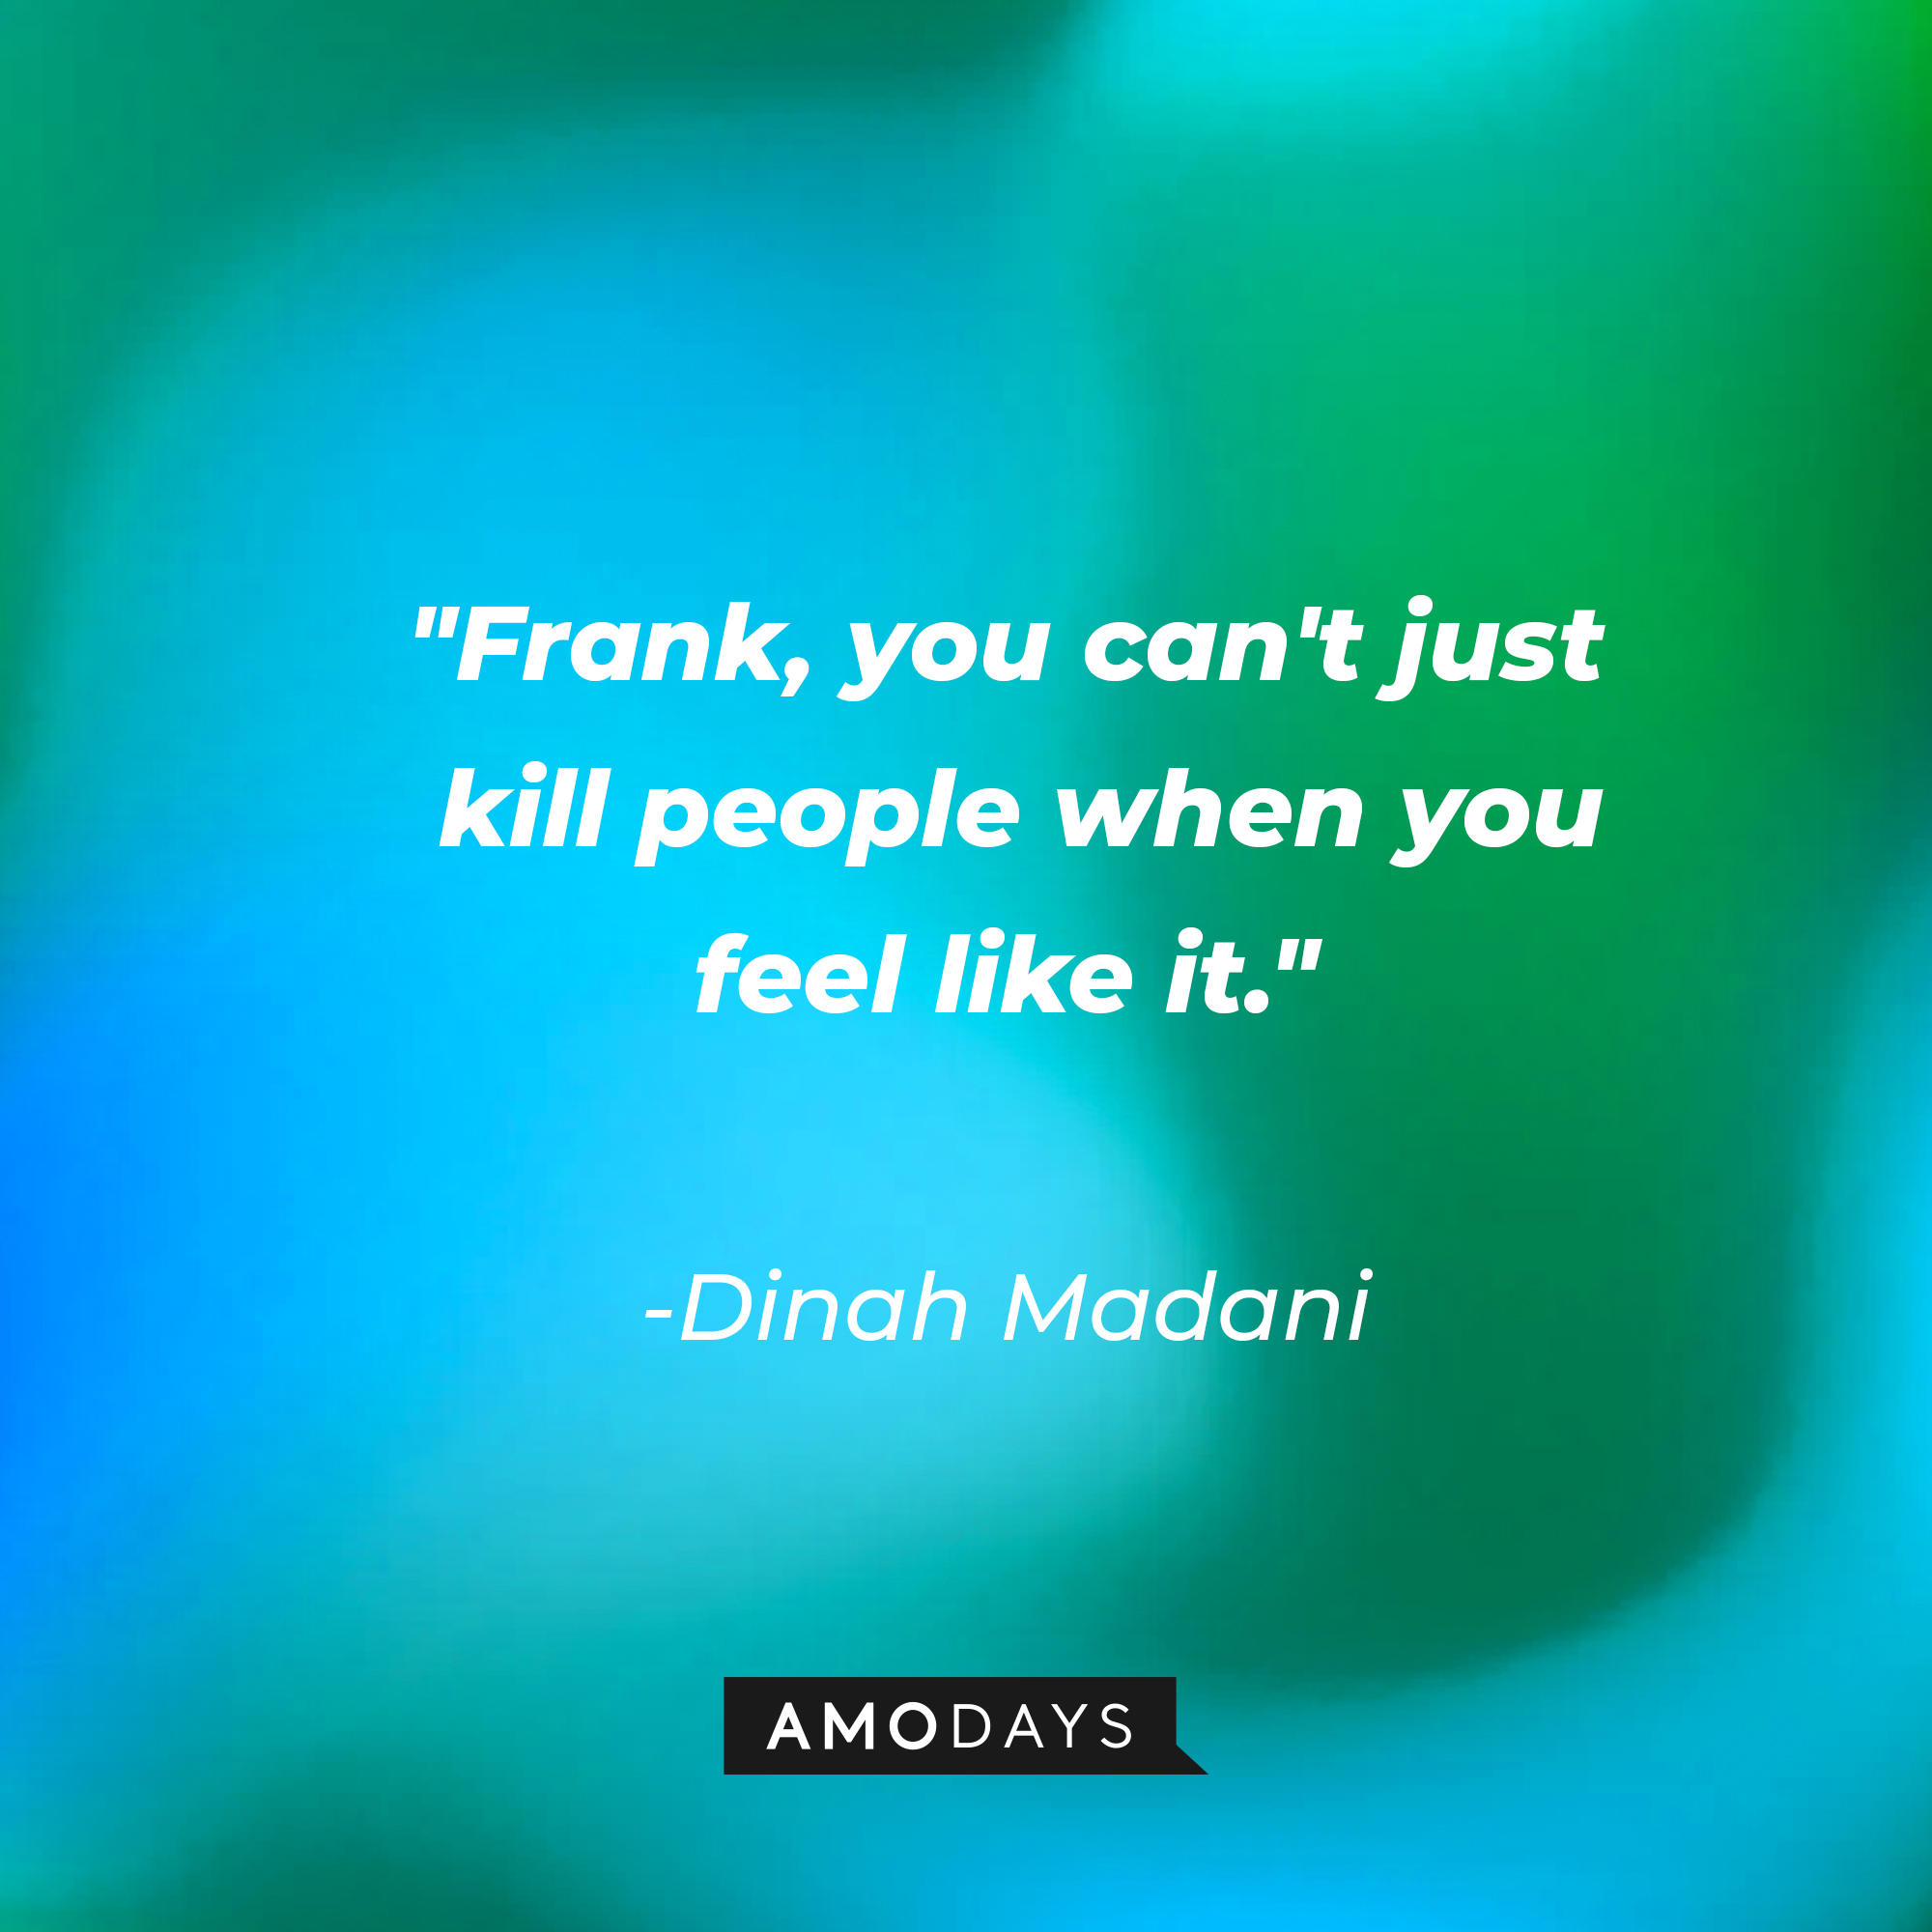 Dinah Madani's quote: "Frank, you can't just kill people when you feel like it." | Source: AmoDays